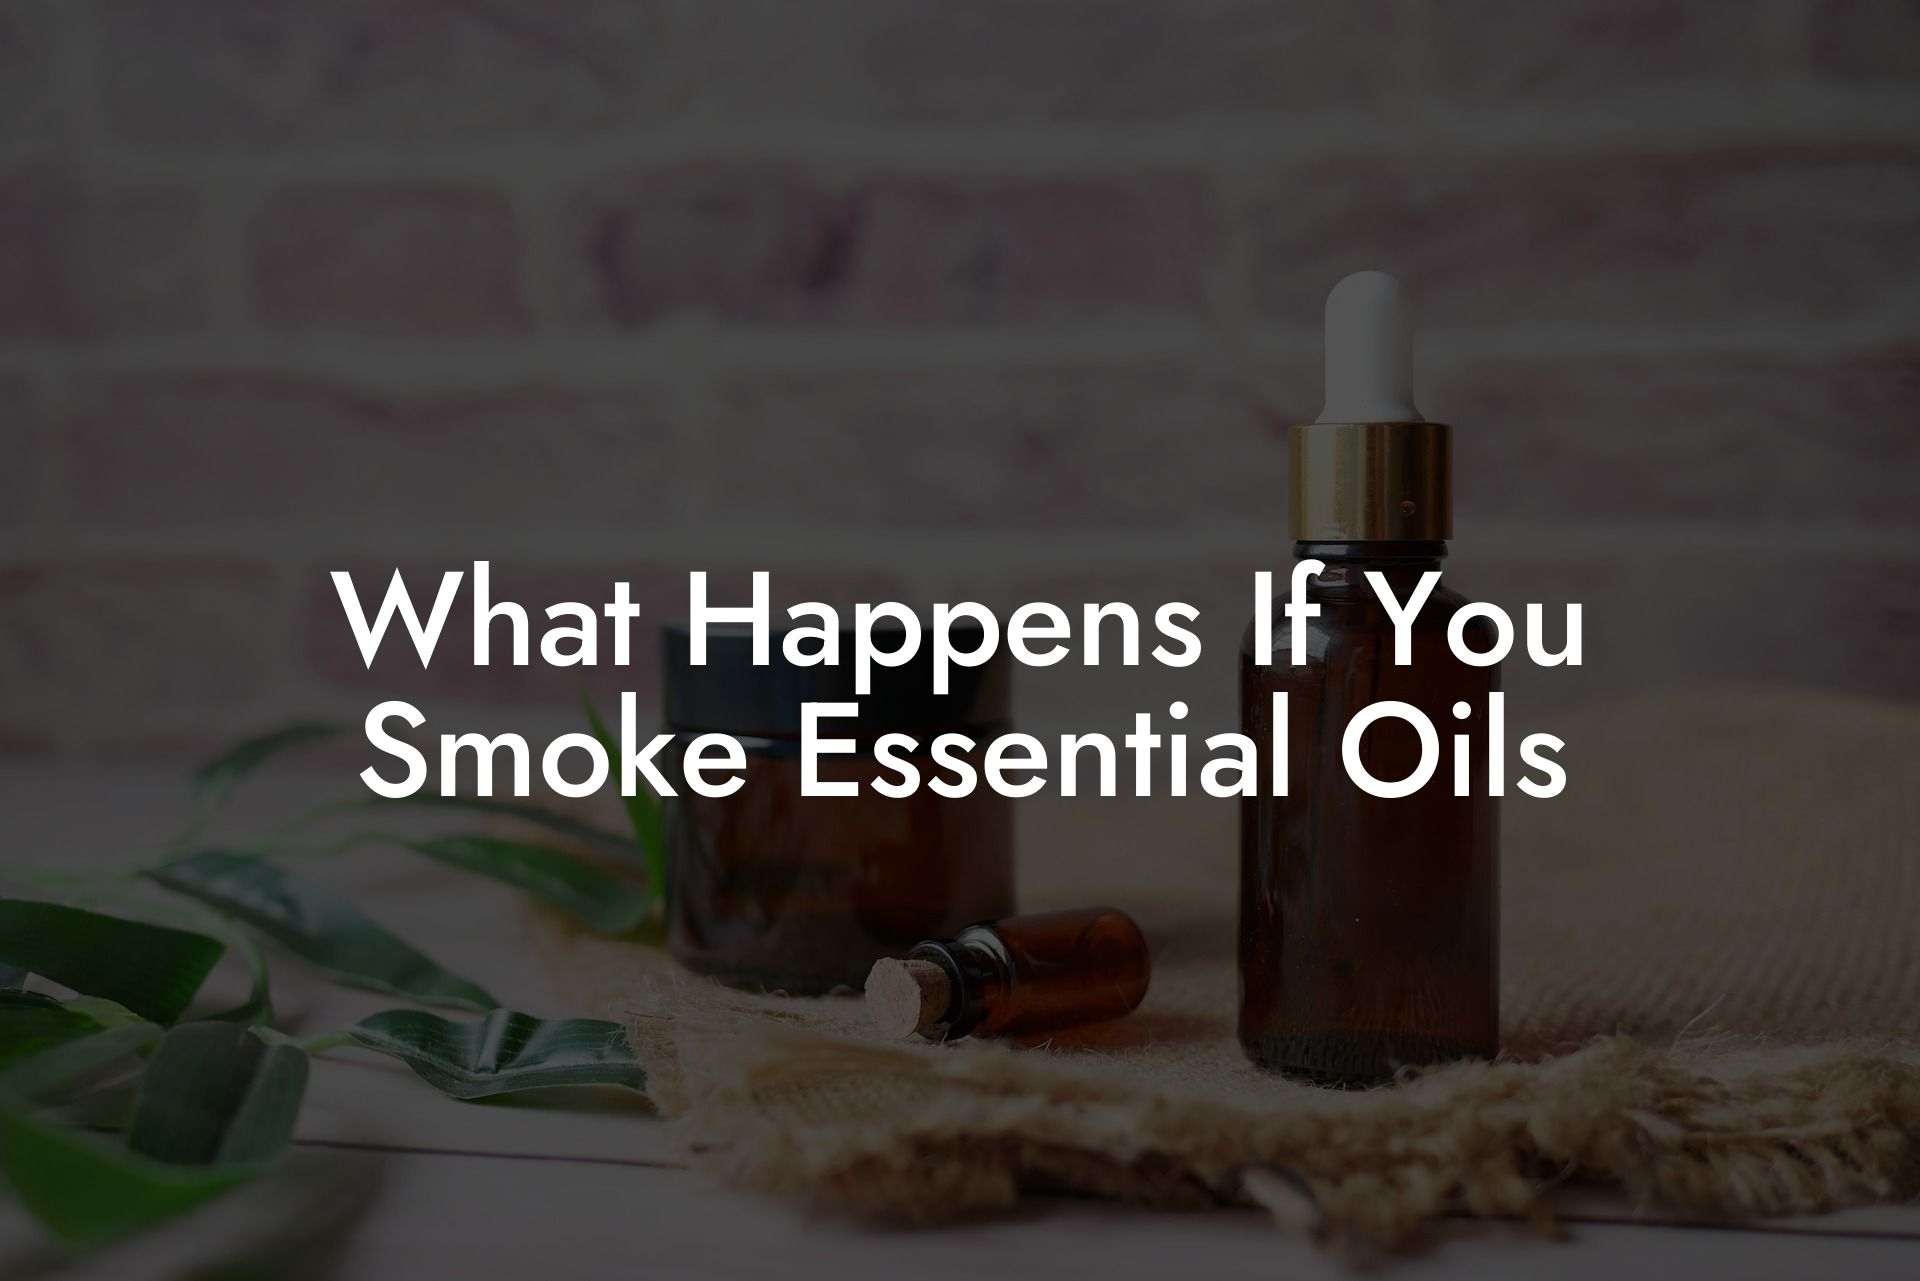 What Happens If You Smoke Essential Oils